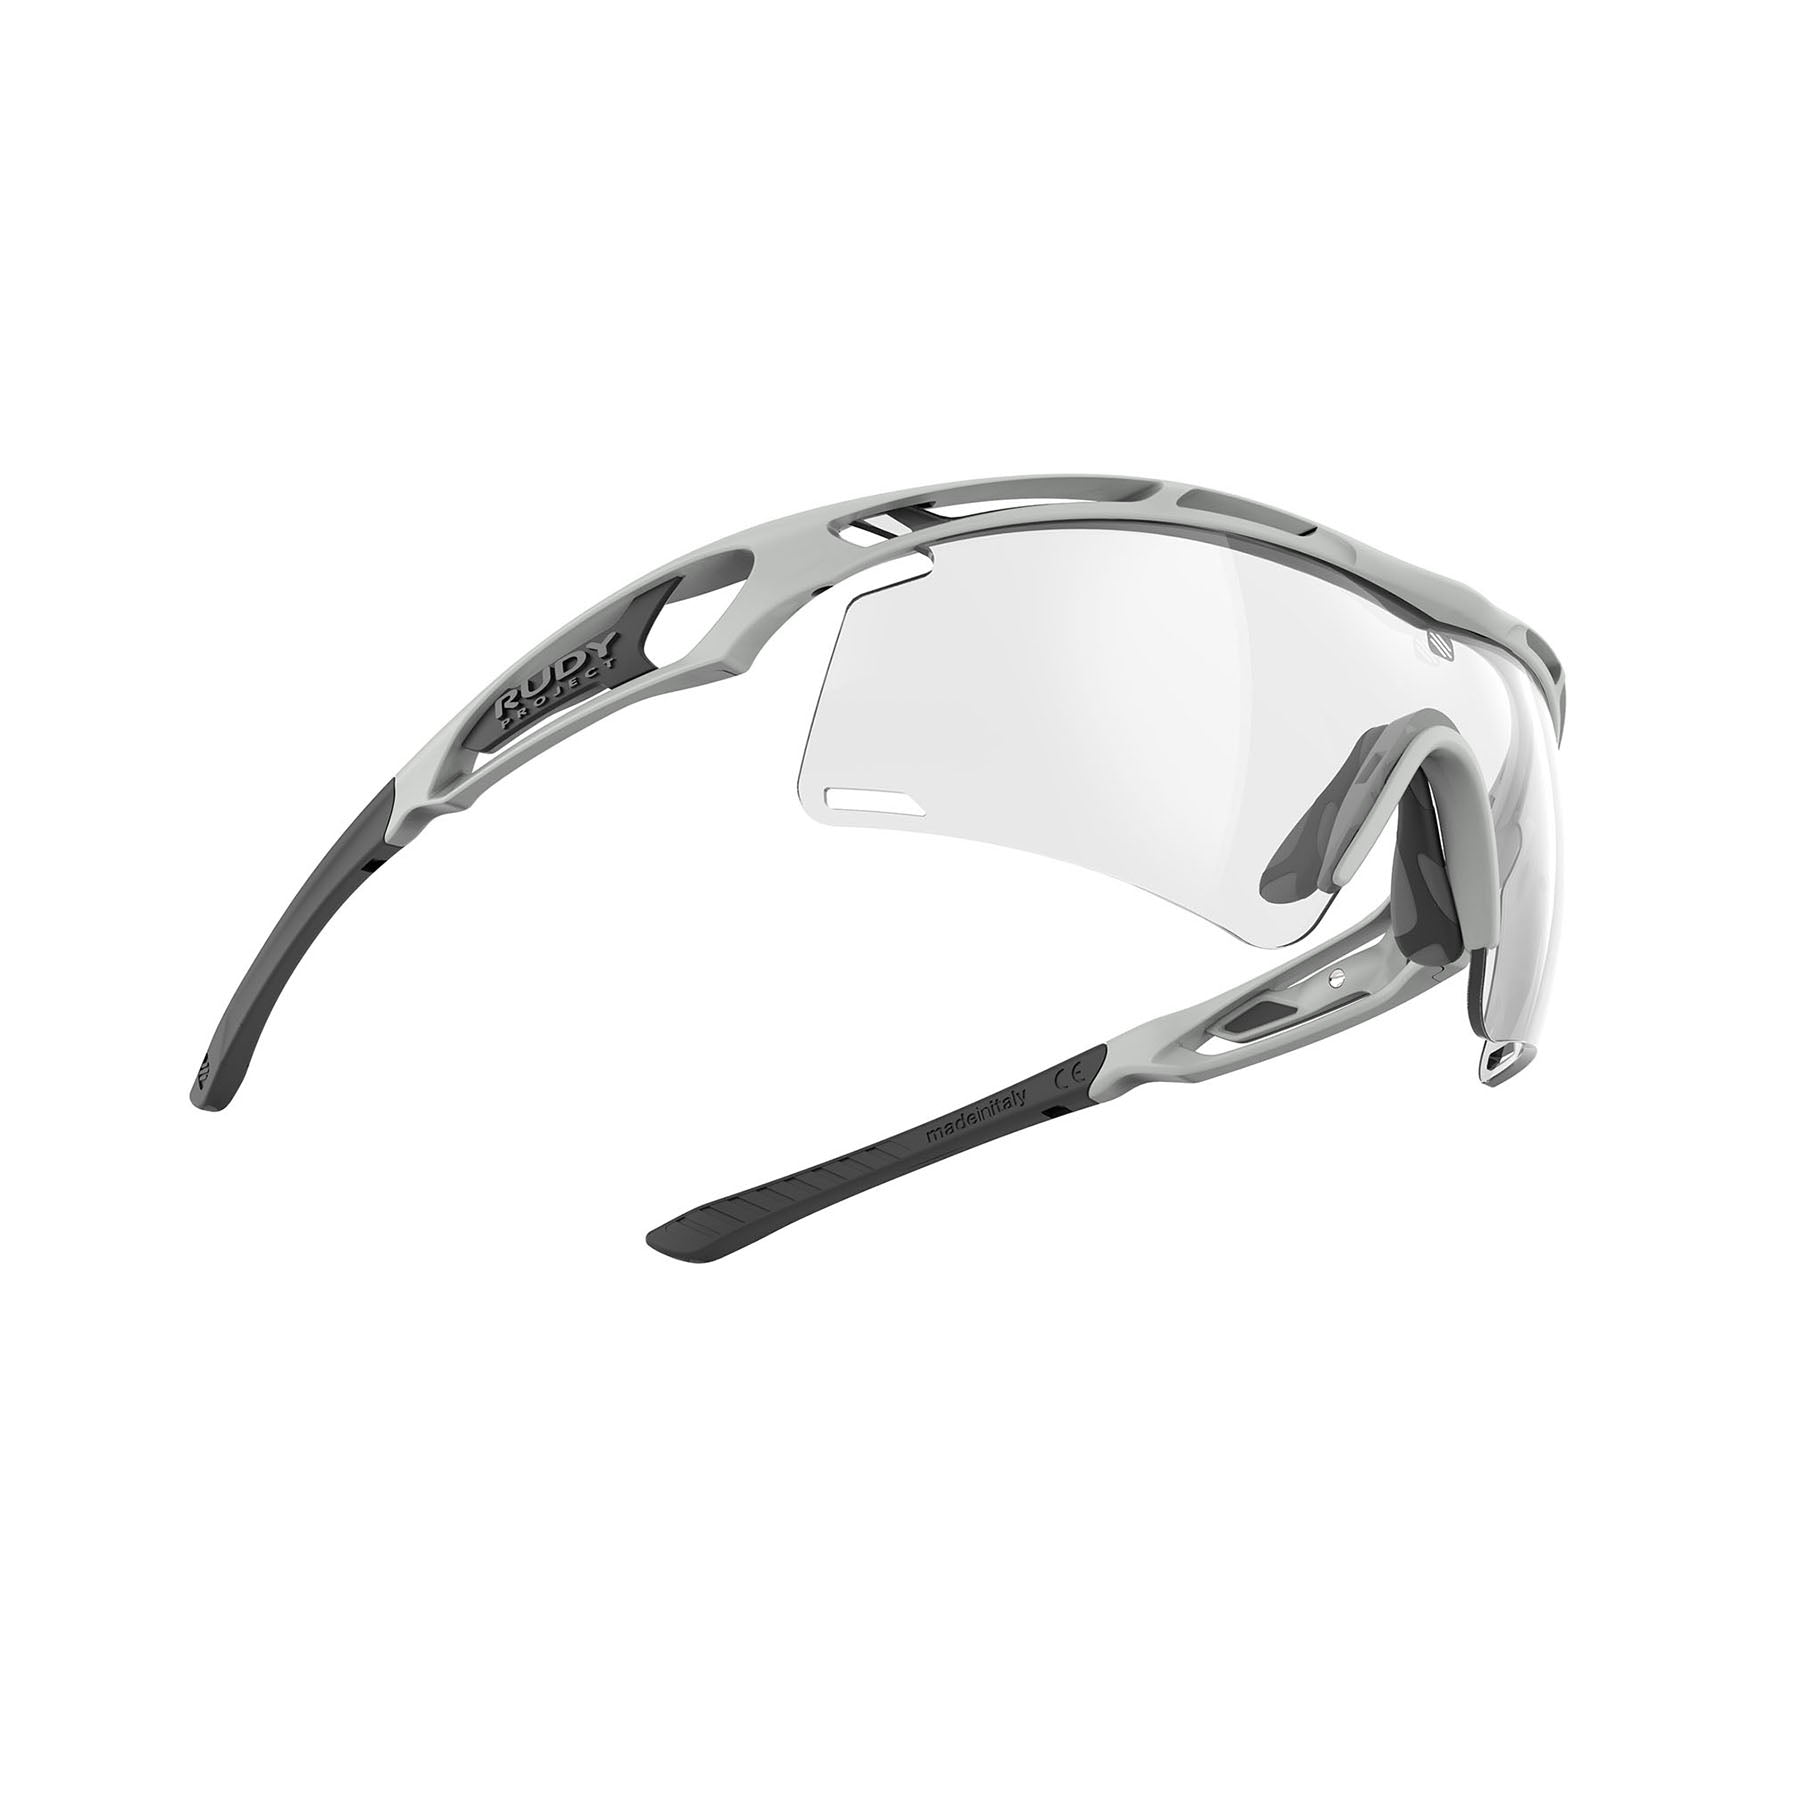 Rudy Project Tralyx running and cycling sport shield prescription sunglasses#color_tralyx-plus-light-grey-matte-frame-with-impactx-photochromic-2-black-lenses